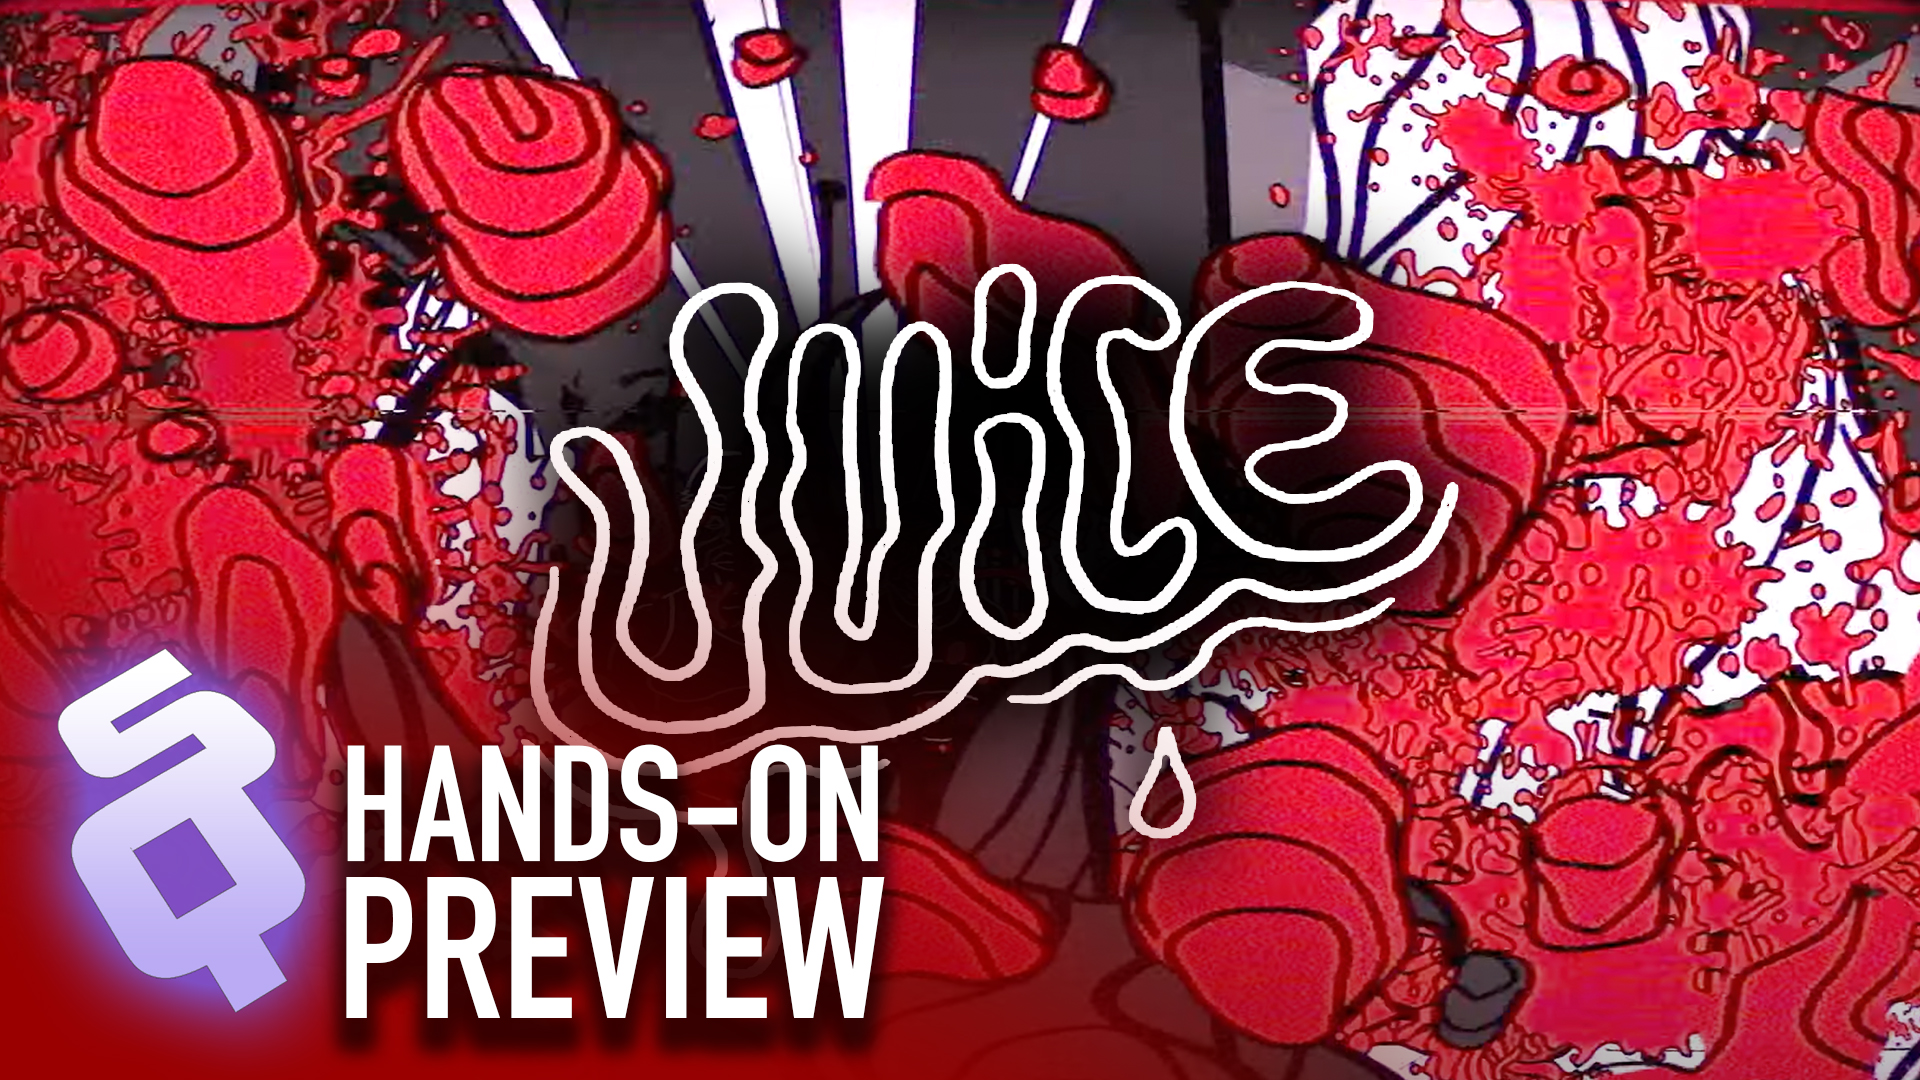 Juice (hands-on preview)